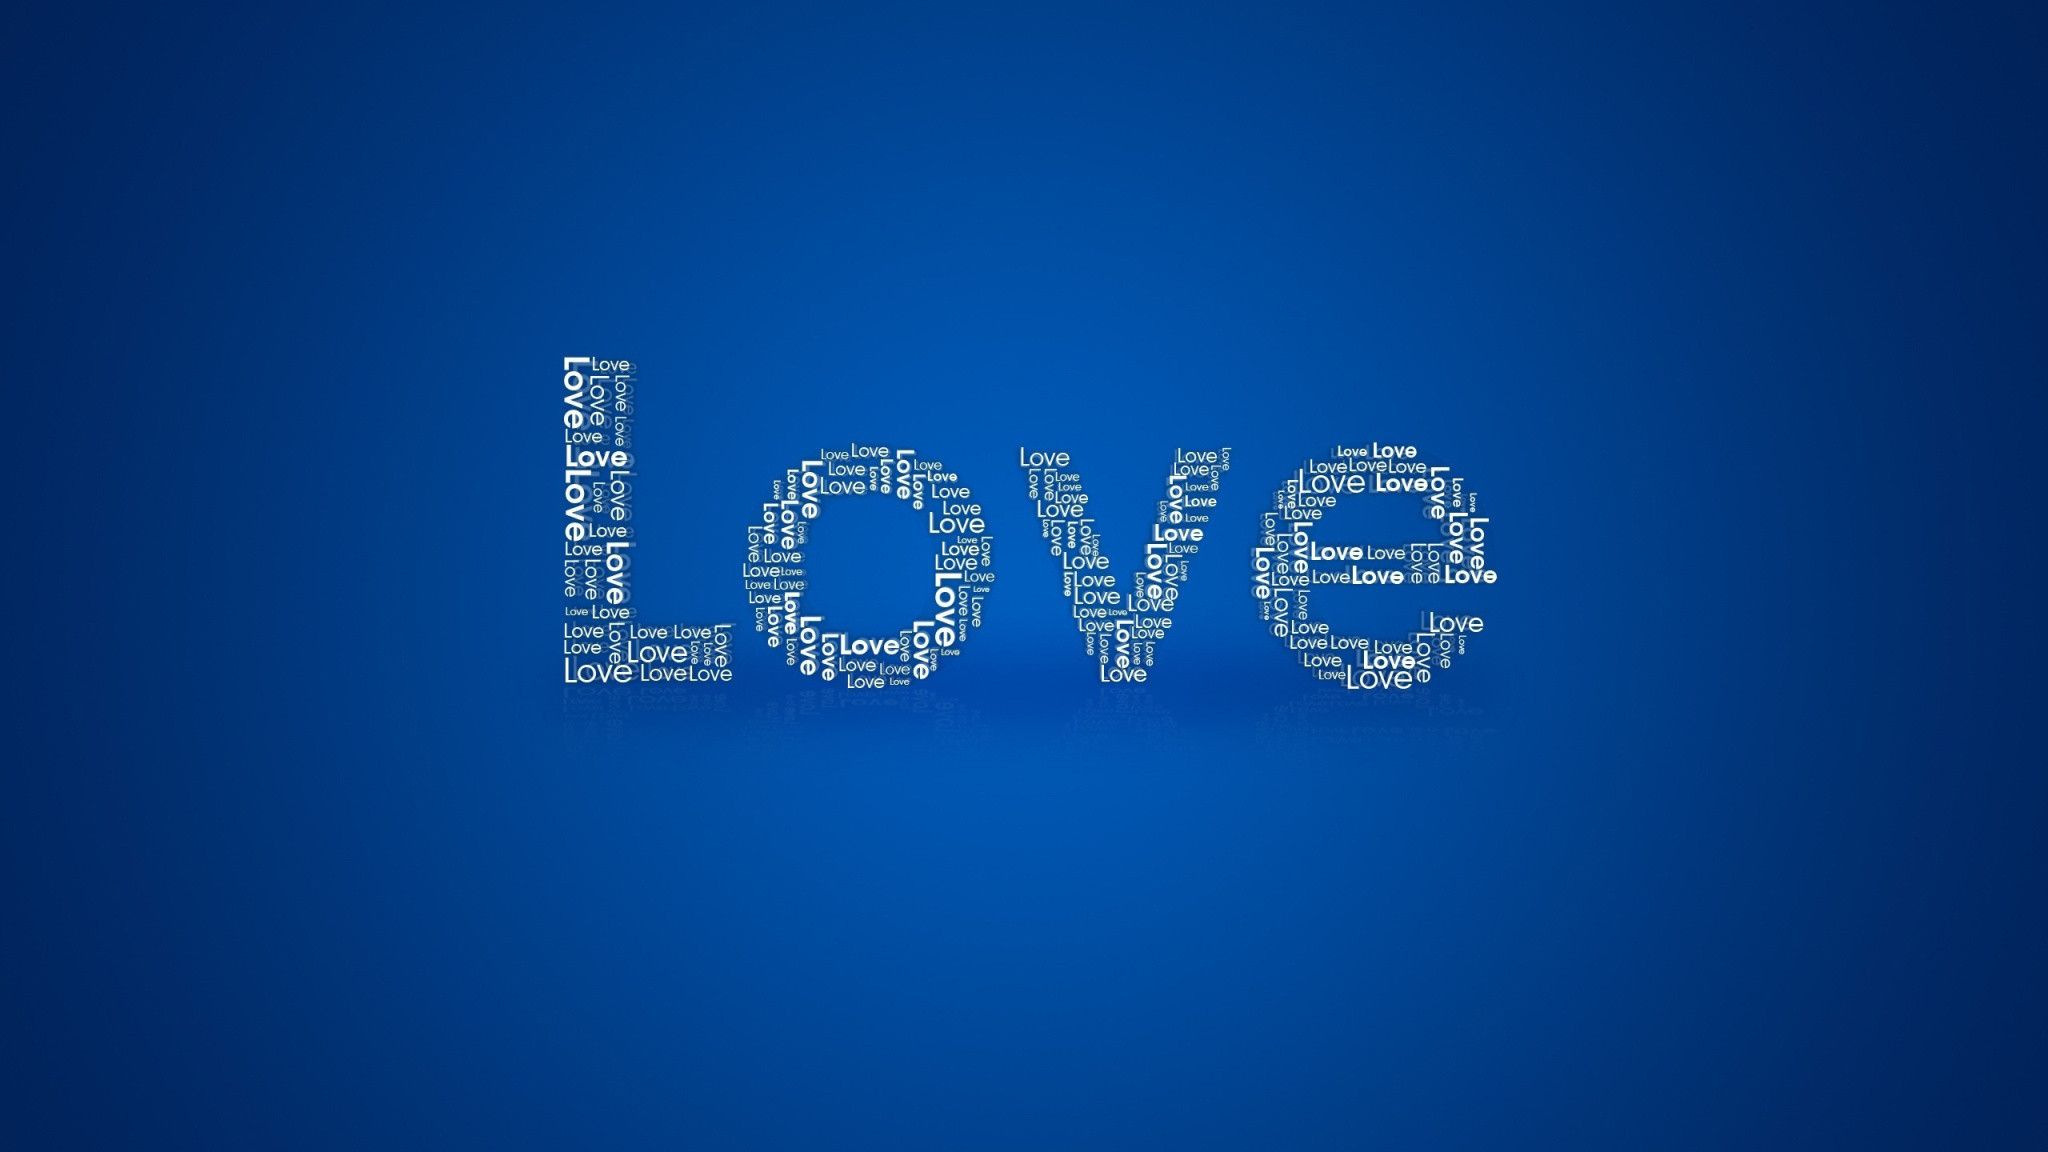 Cool Love Backgrounds 